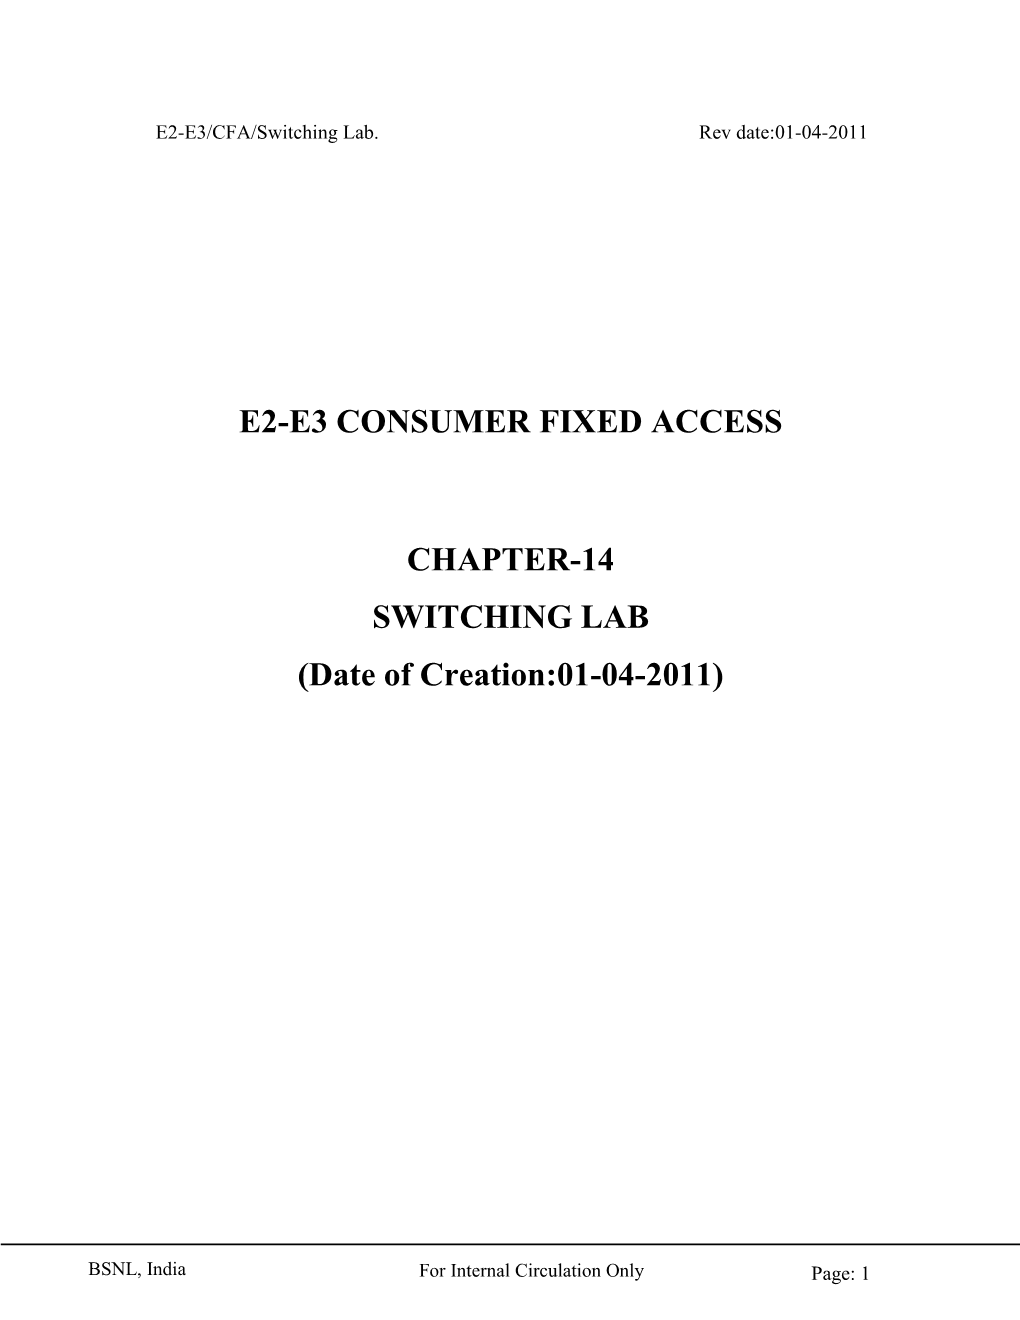 E2-E3 Consumer Fixed Access Chapter-14 Switching